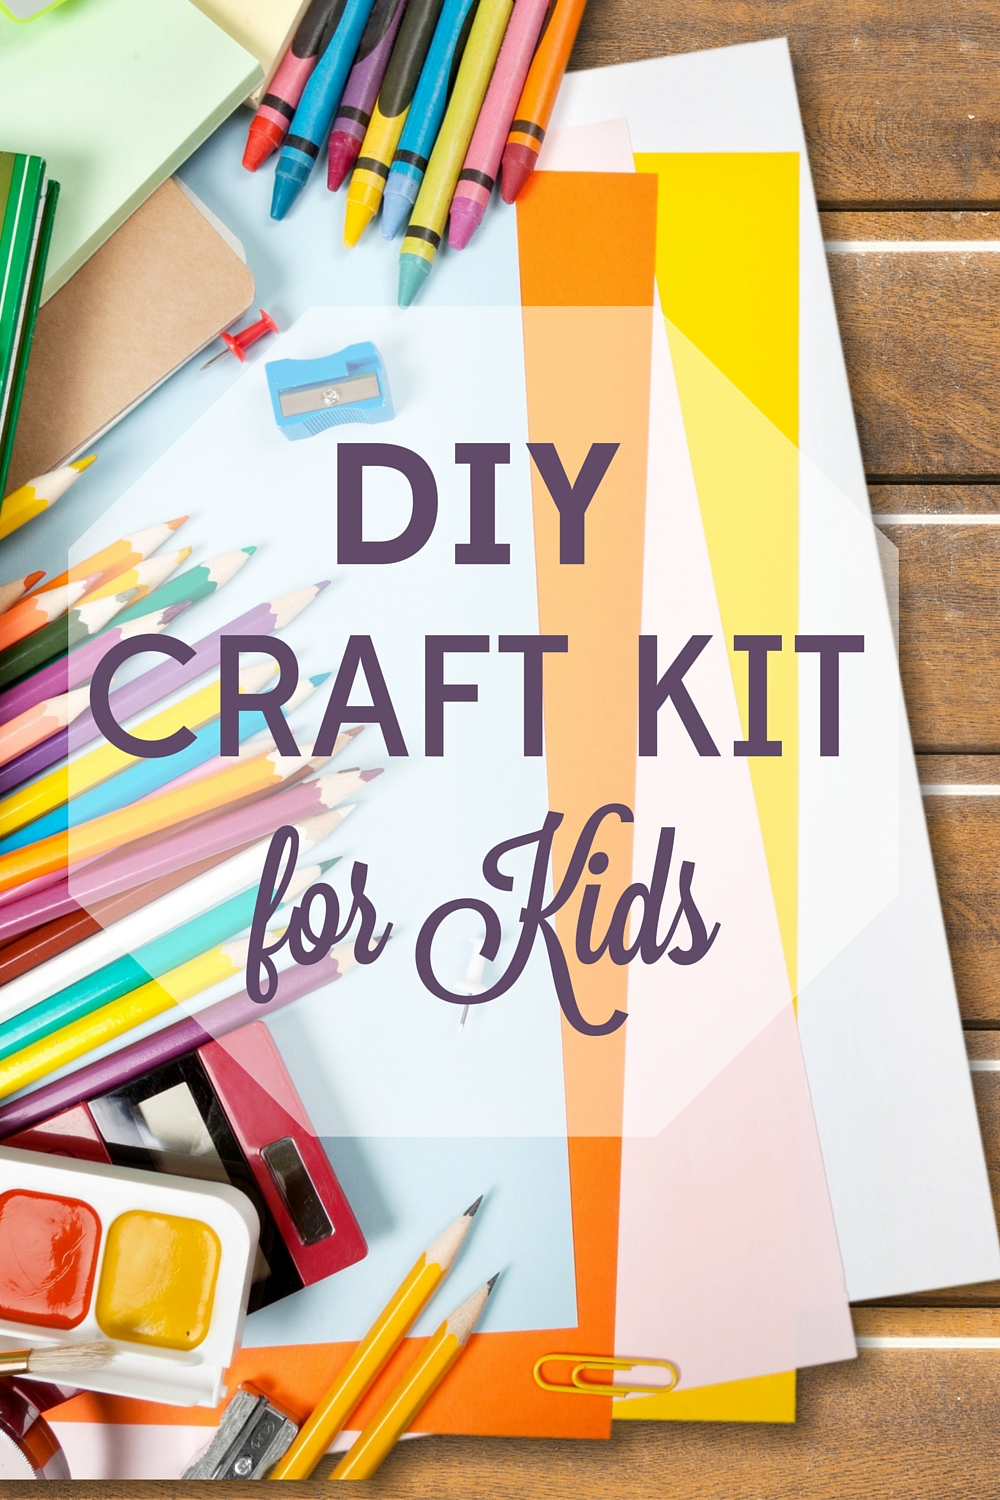 How to Put Together a Craft Kit on a Budget